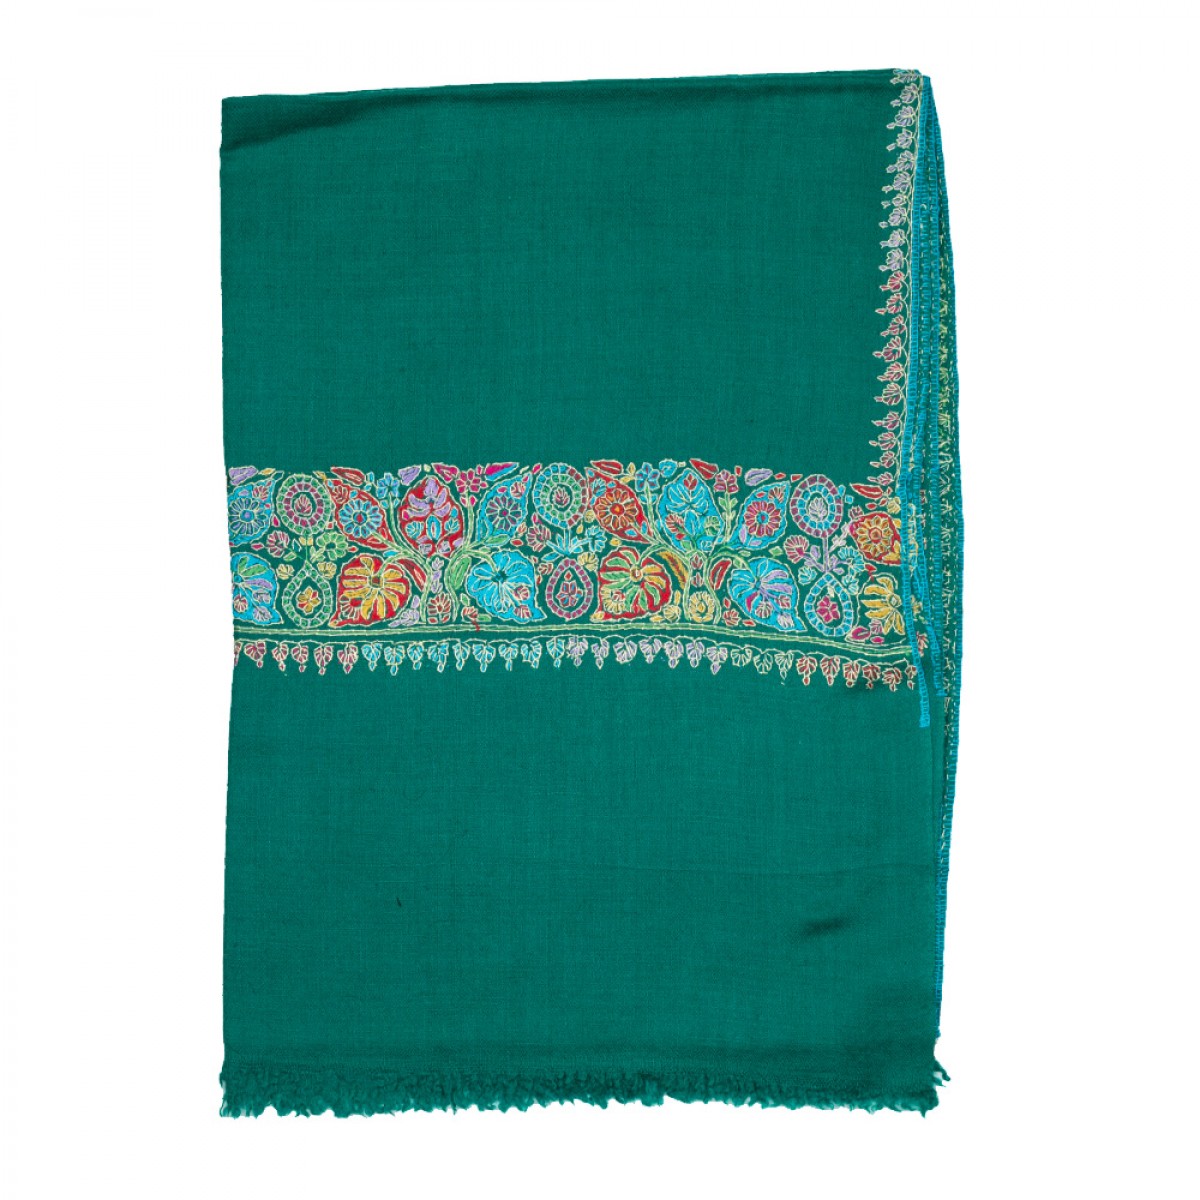 Embroidered Pashmina Stole - Deep Green & Blue